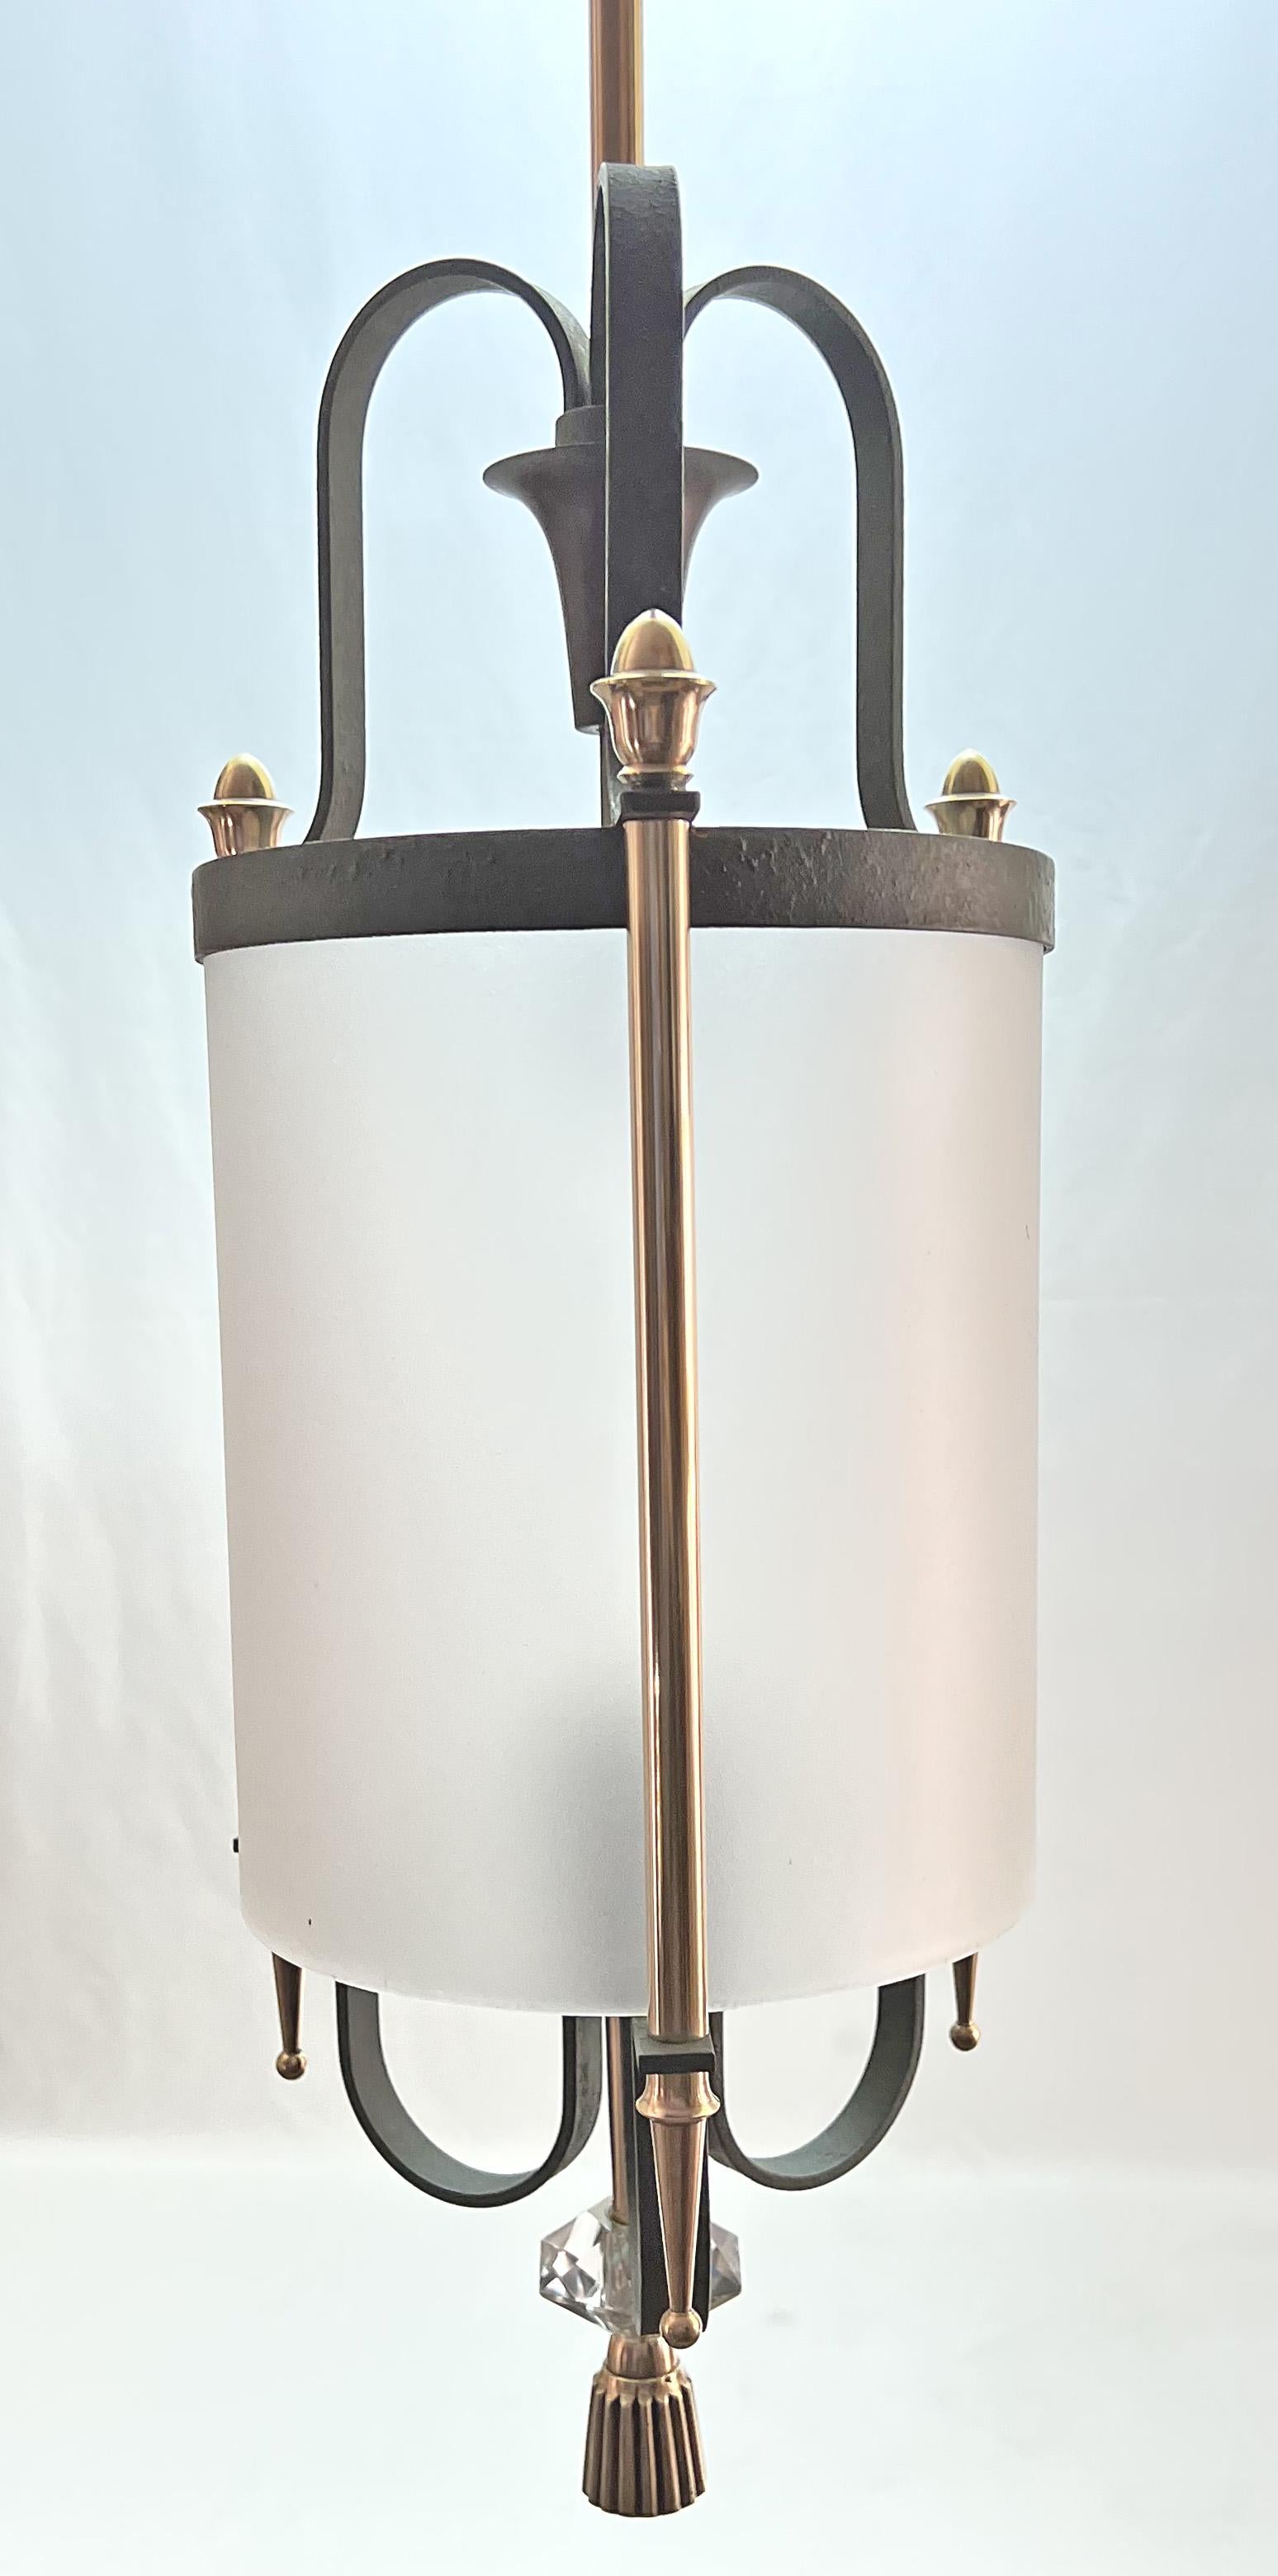 Lantern Hanging Light in Wrought Iron and Bronze, 1940s For Sale 6